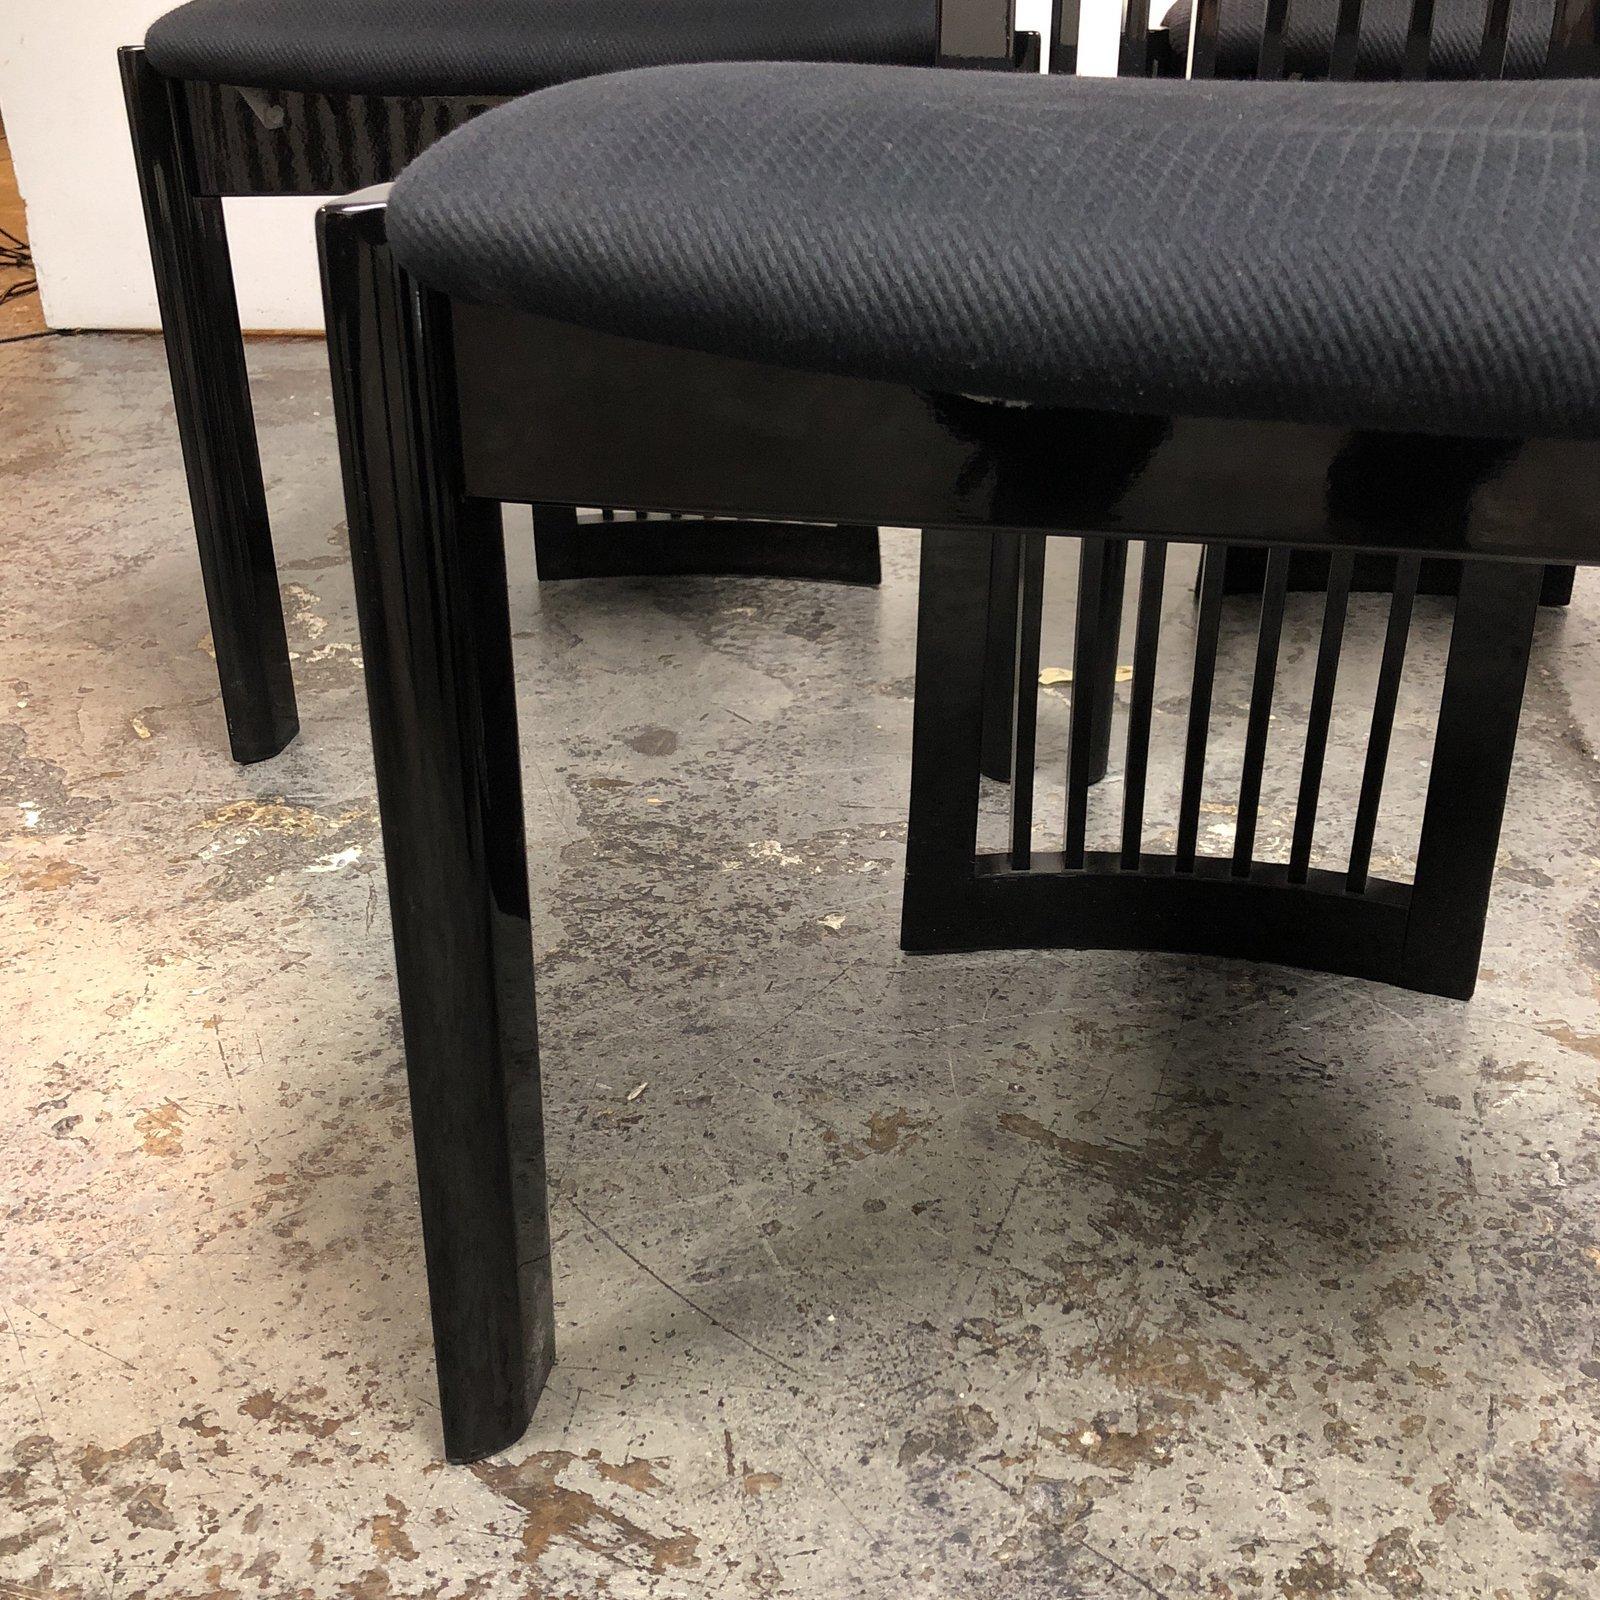 A set of eight Pietro Costantini dining chairs sold by Ello Furniture in black on black. Minor wear from sun exposure on fabric. Shades of black define these pieces; black matte fabric cushions lightly contrast the glassy onyx lacquer finish on the